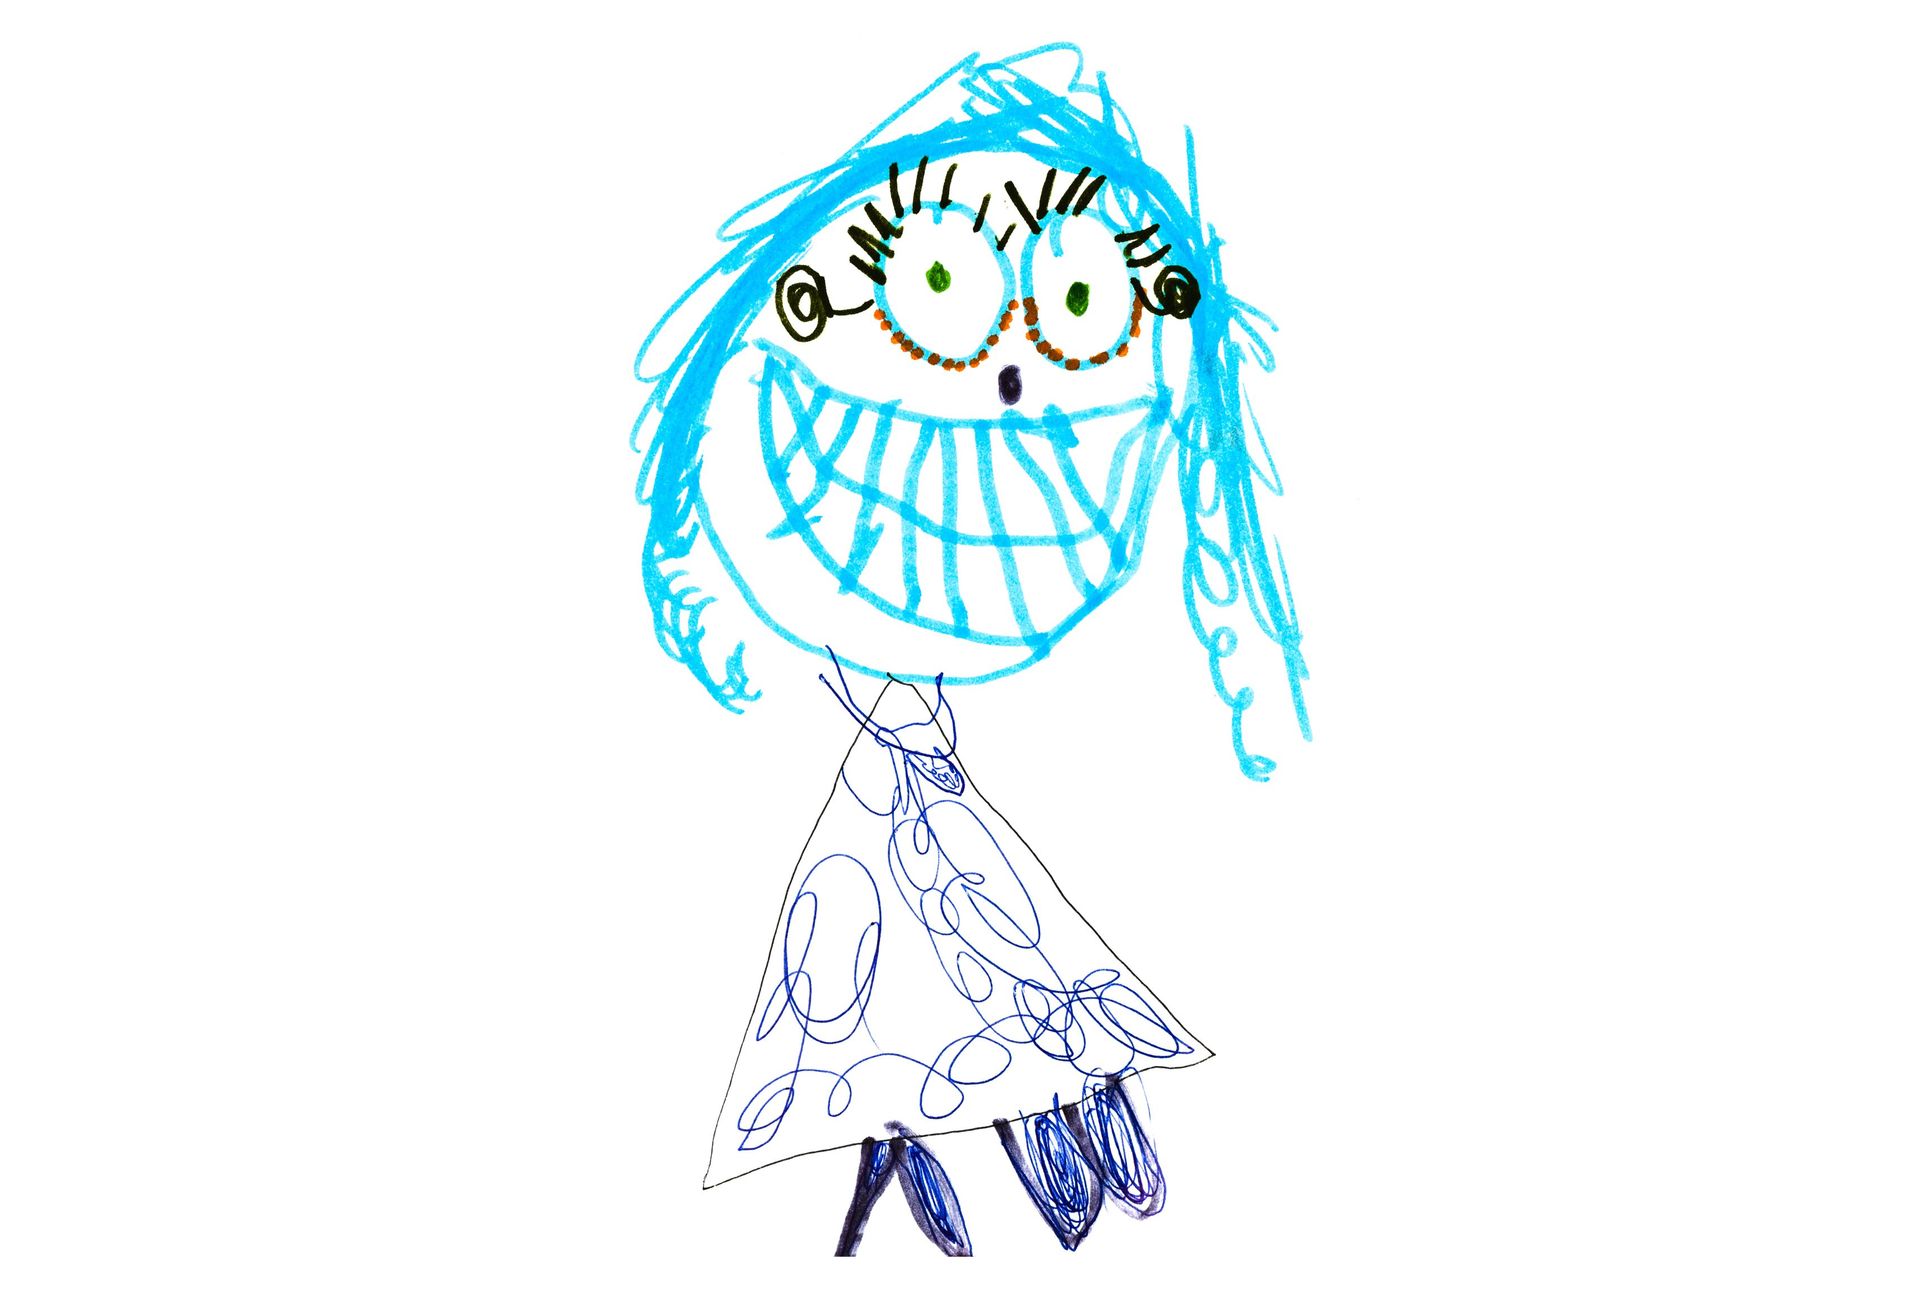 Children's drawing of a girl with blue hair